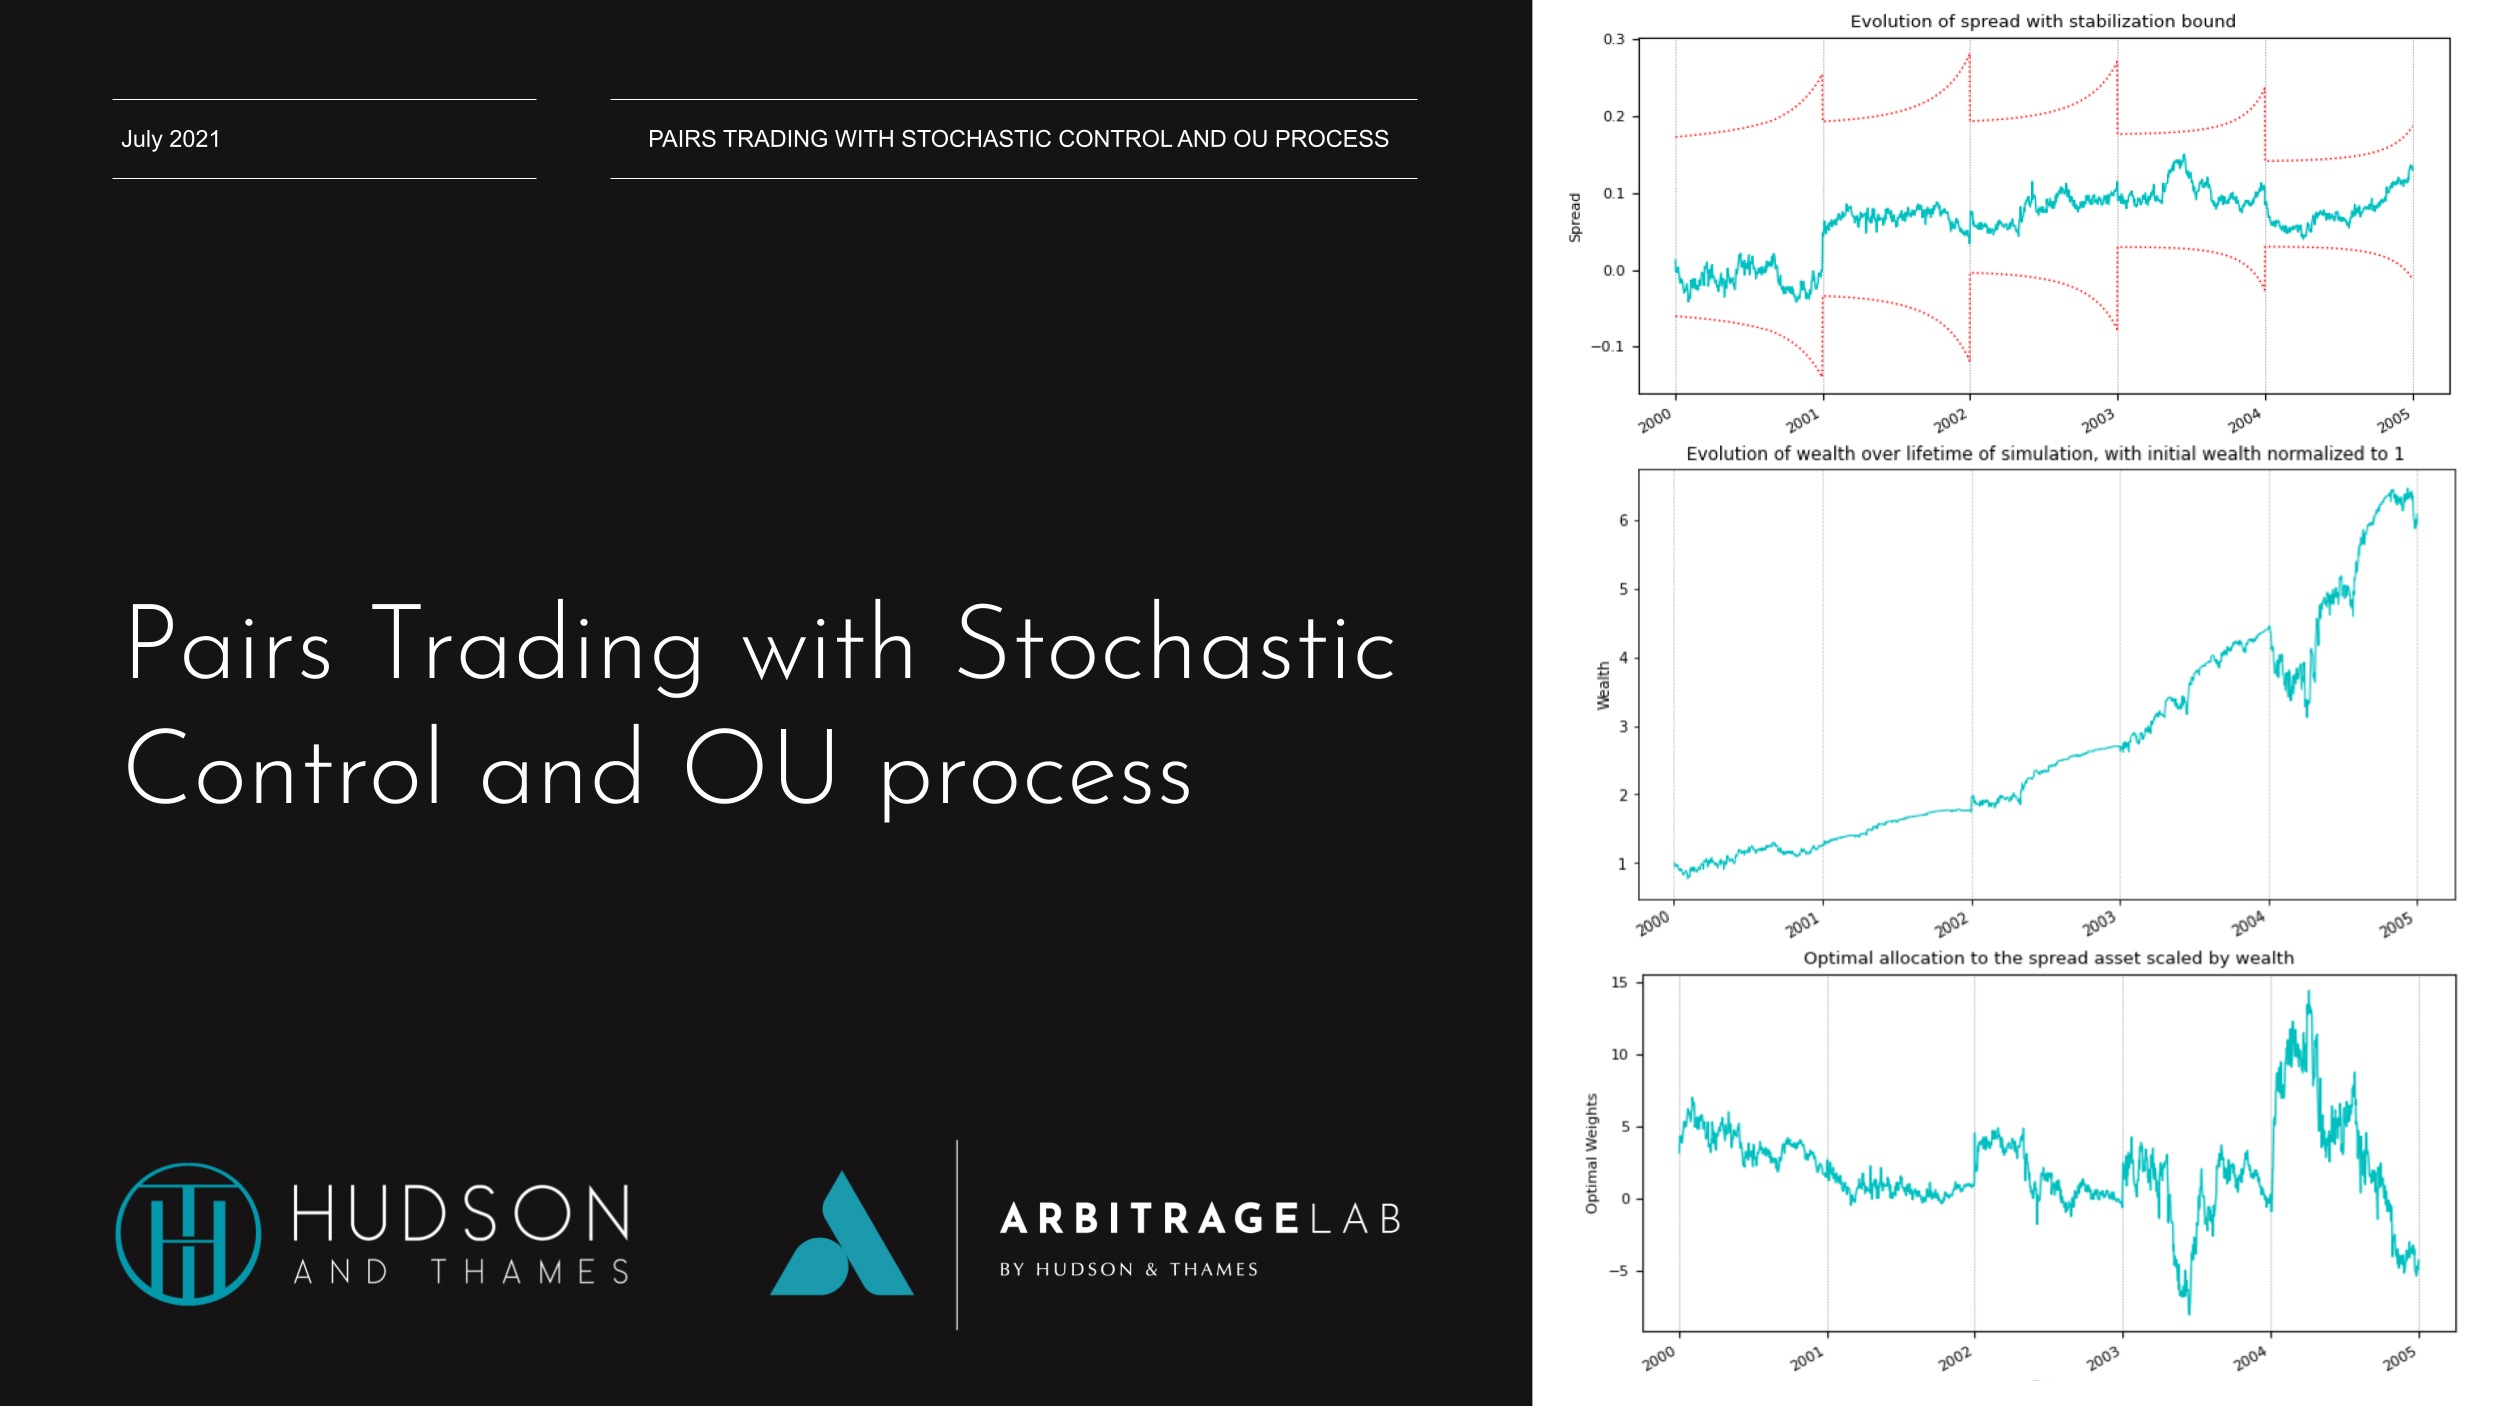 Pairs Trading with Stochastic Control and OU process